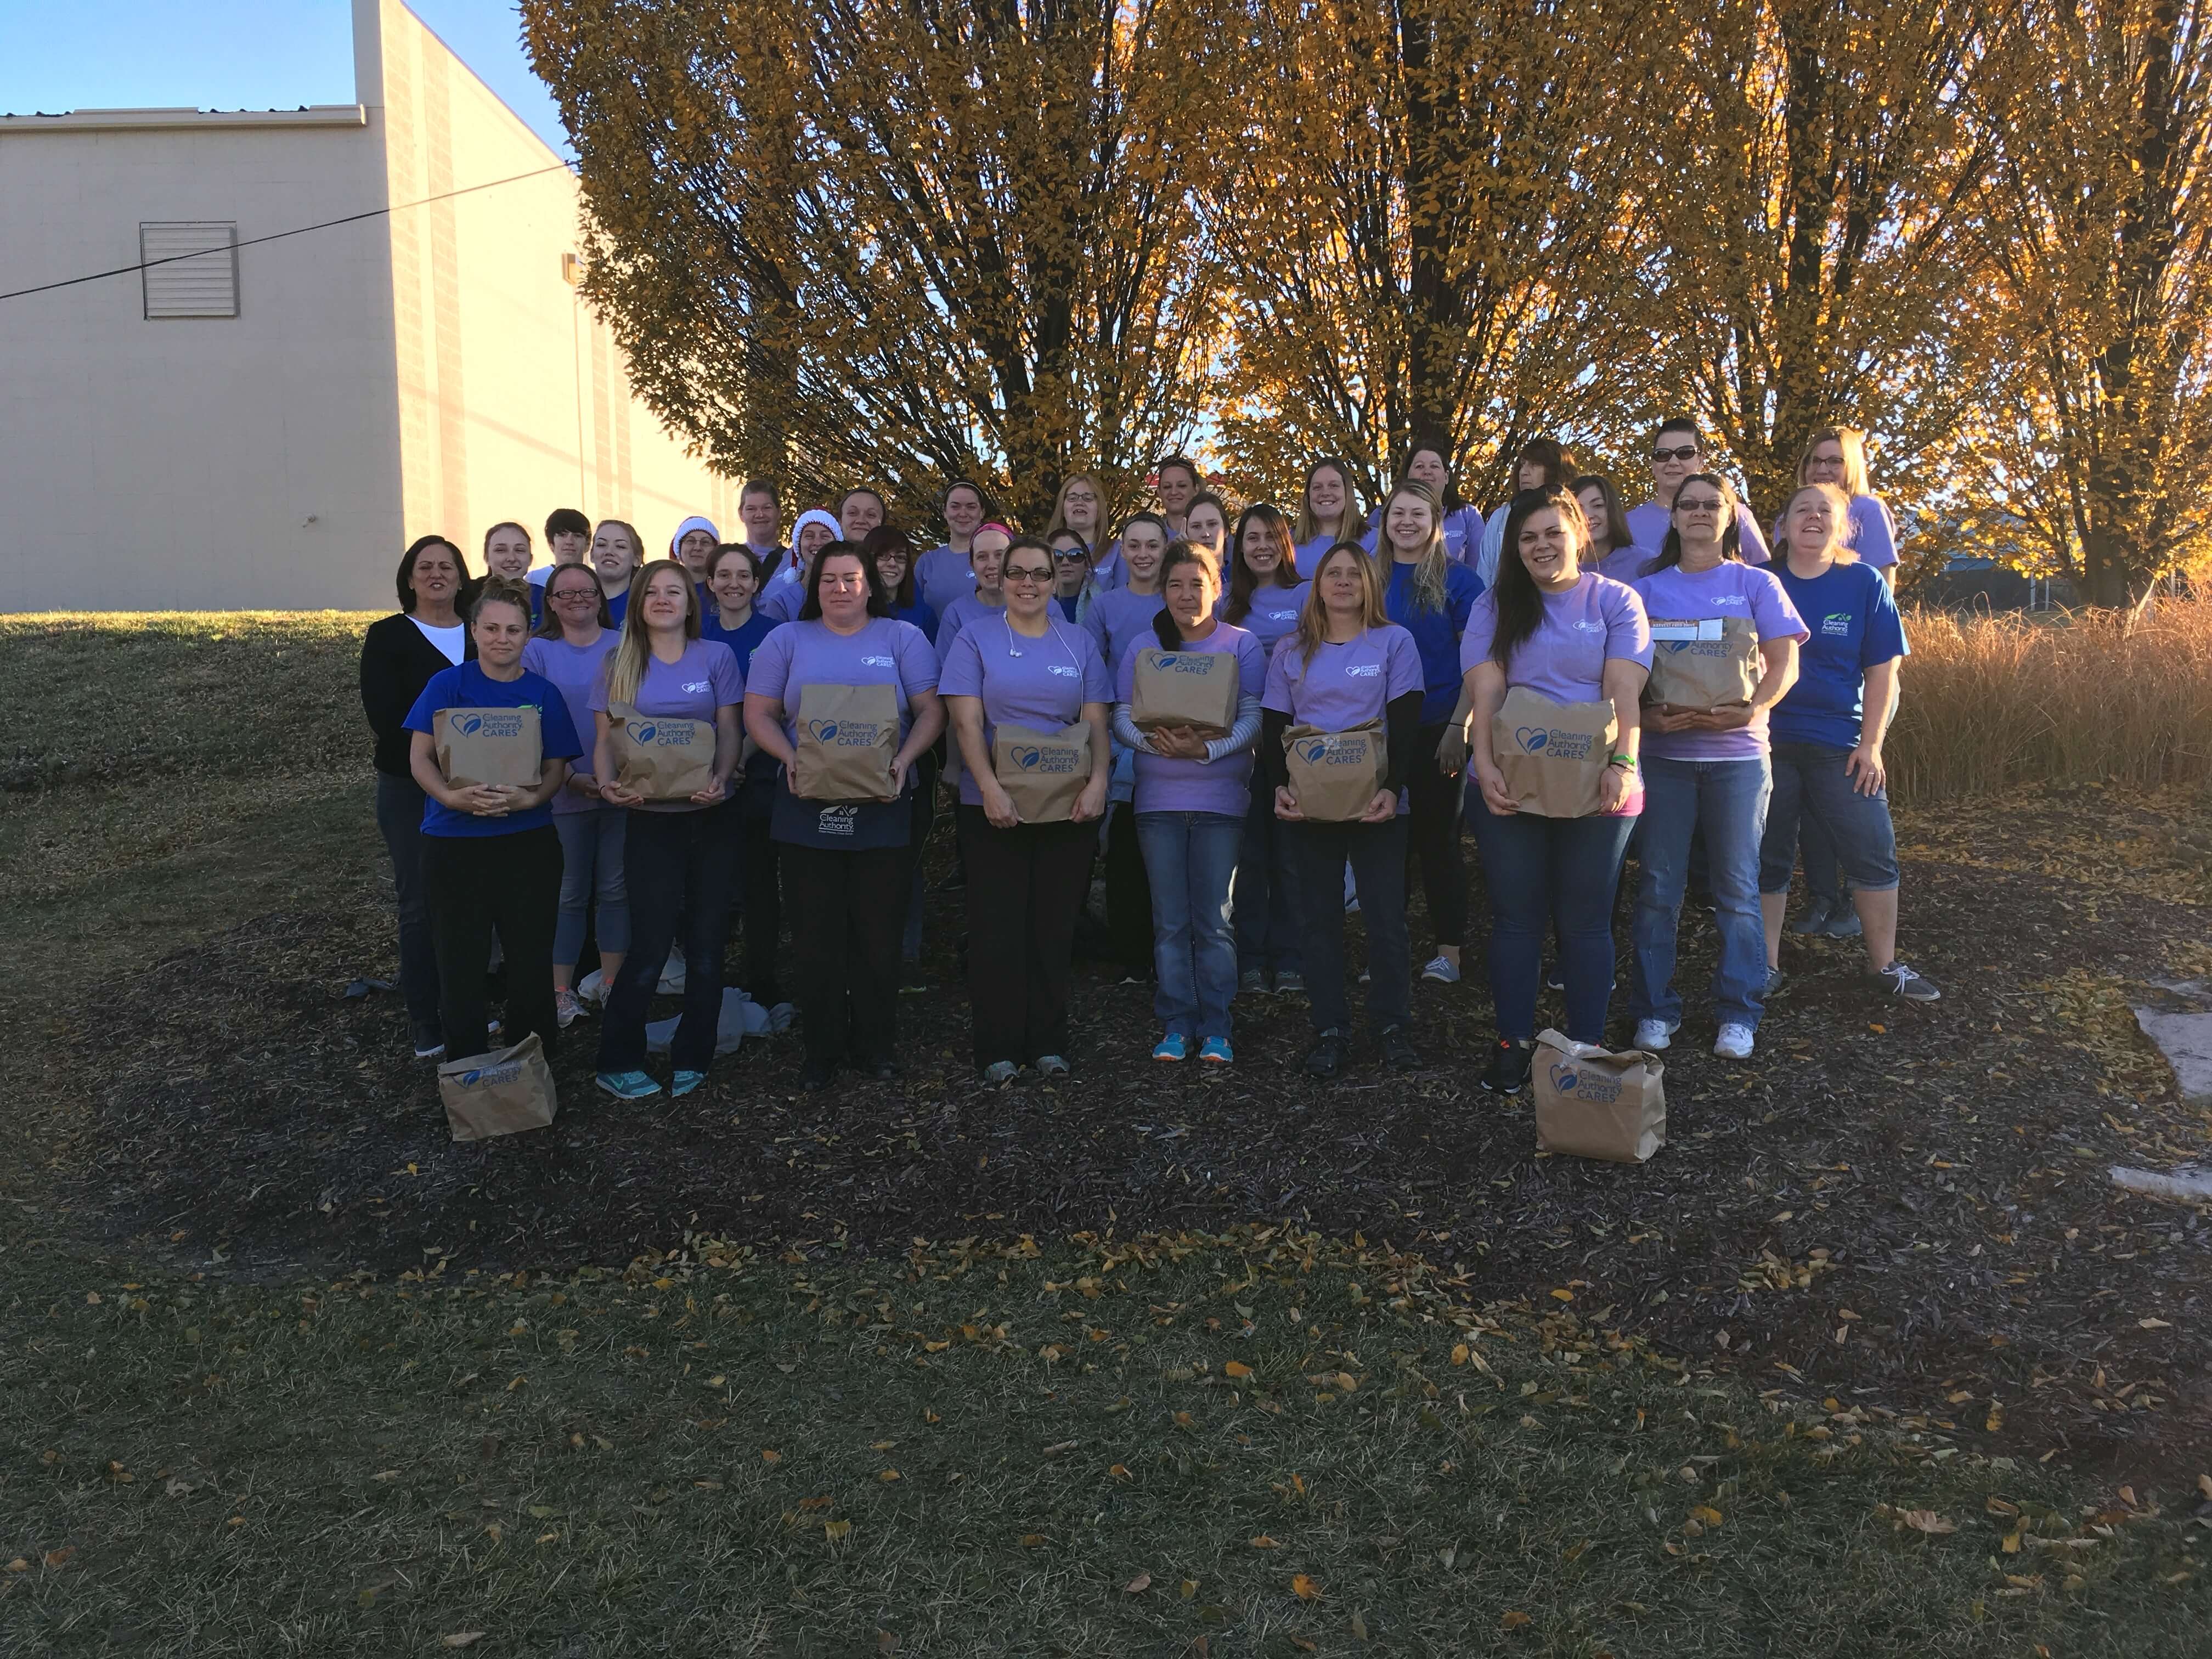 The TCA St. Charles team poses outside with donations collected for a local charity.